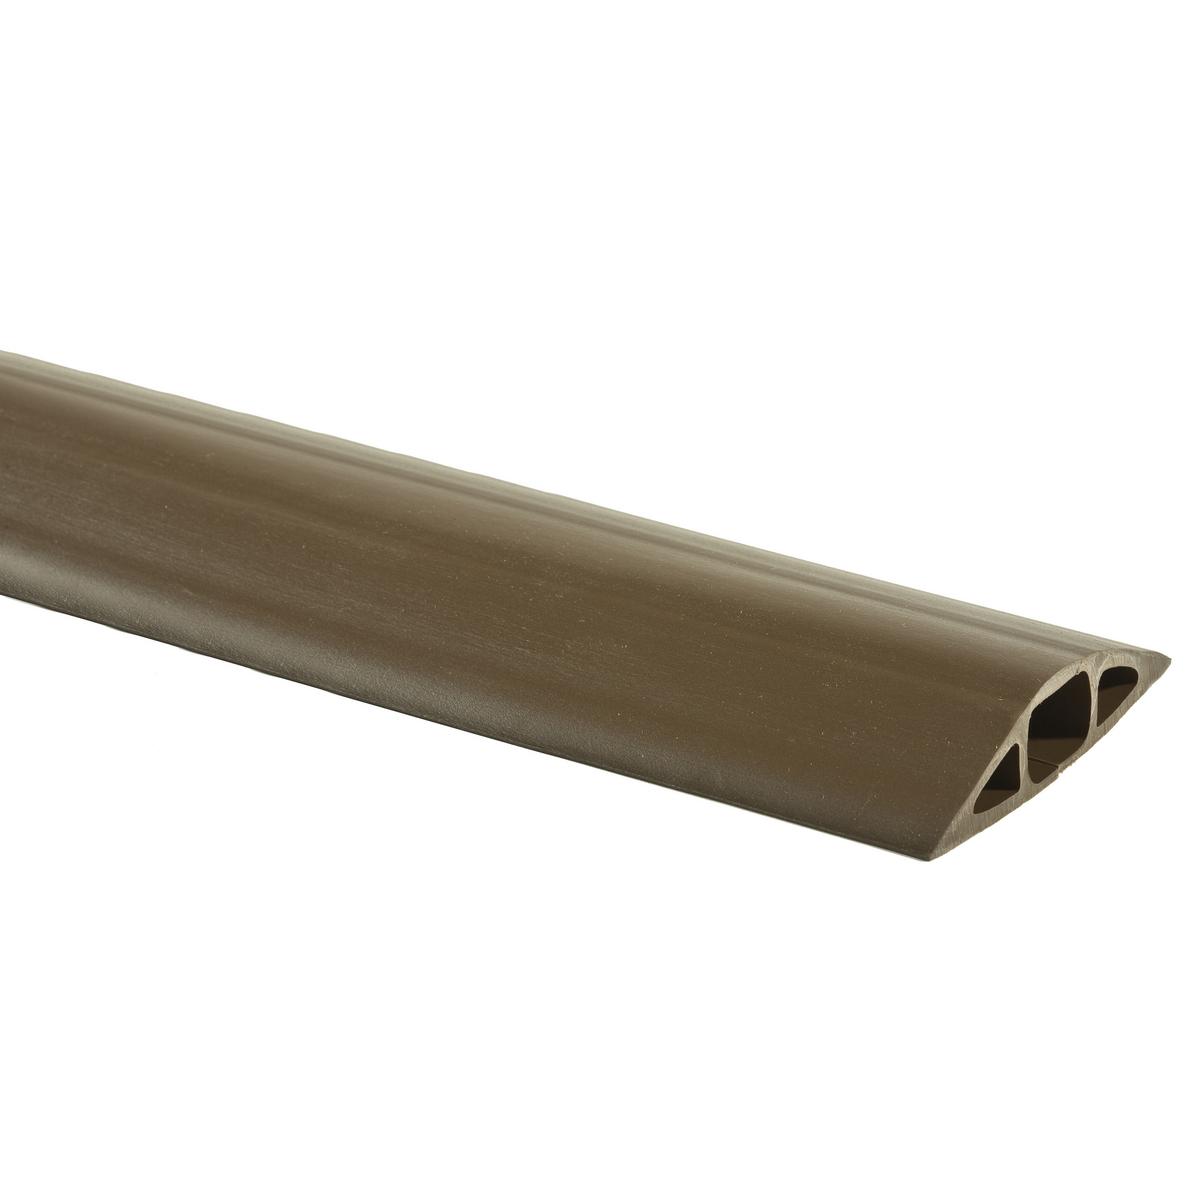 Hubbell BRYFT2BR10 FloorTrakFlexible Non-Metallic Cover for Cables, Size 2, Brown, 10' 